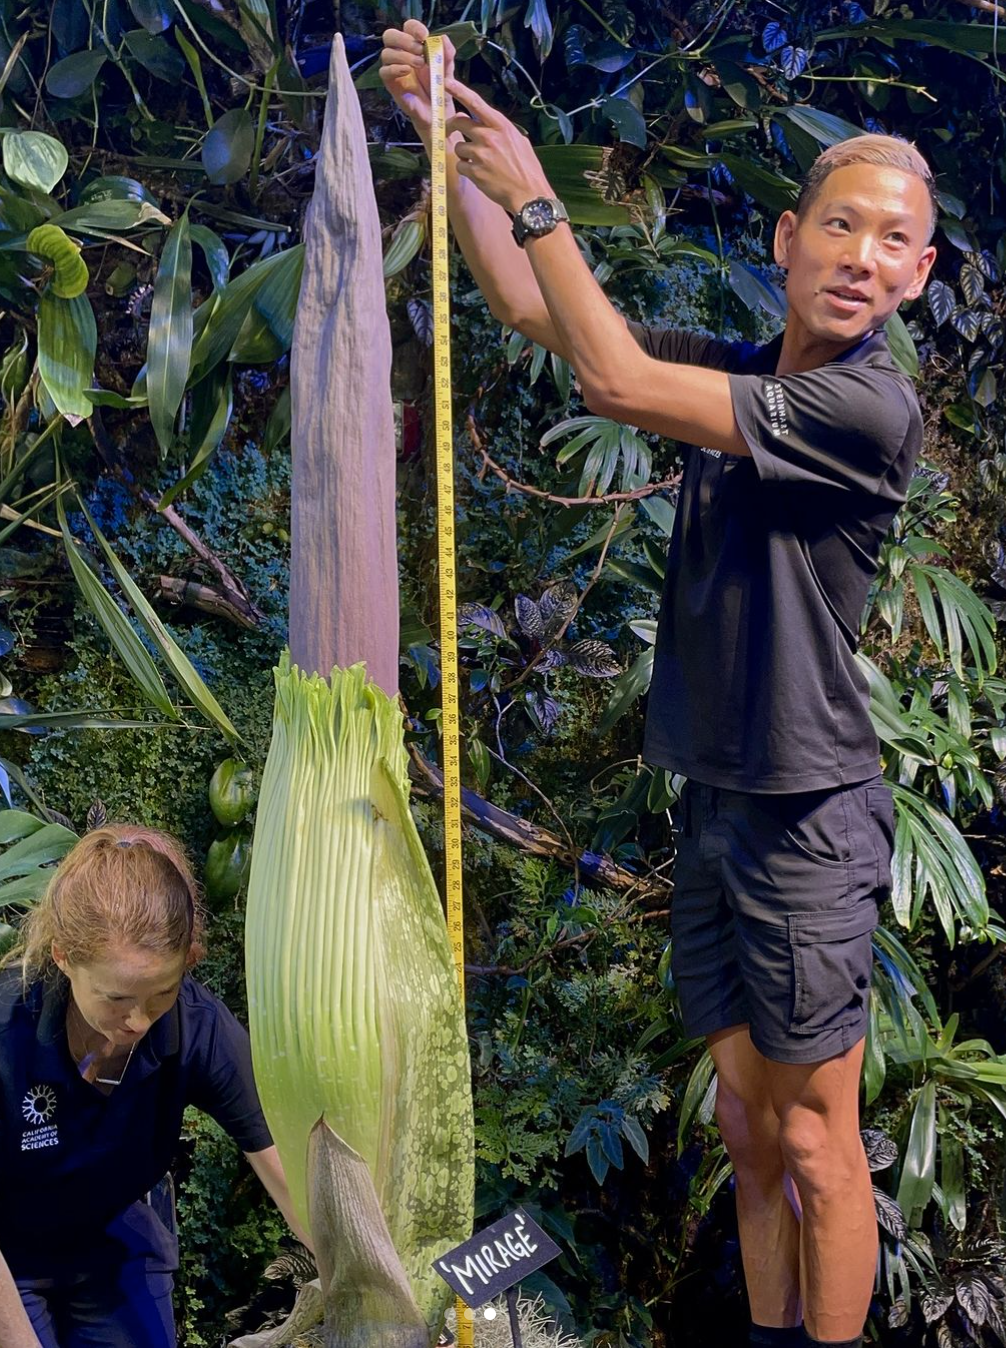 An Asian man in shorts and t-shirt measures a long slender plant, assisted by a white woman at the base of the plant. 